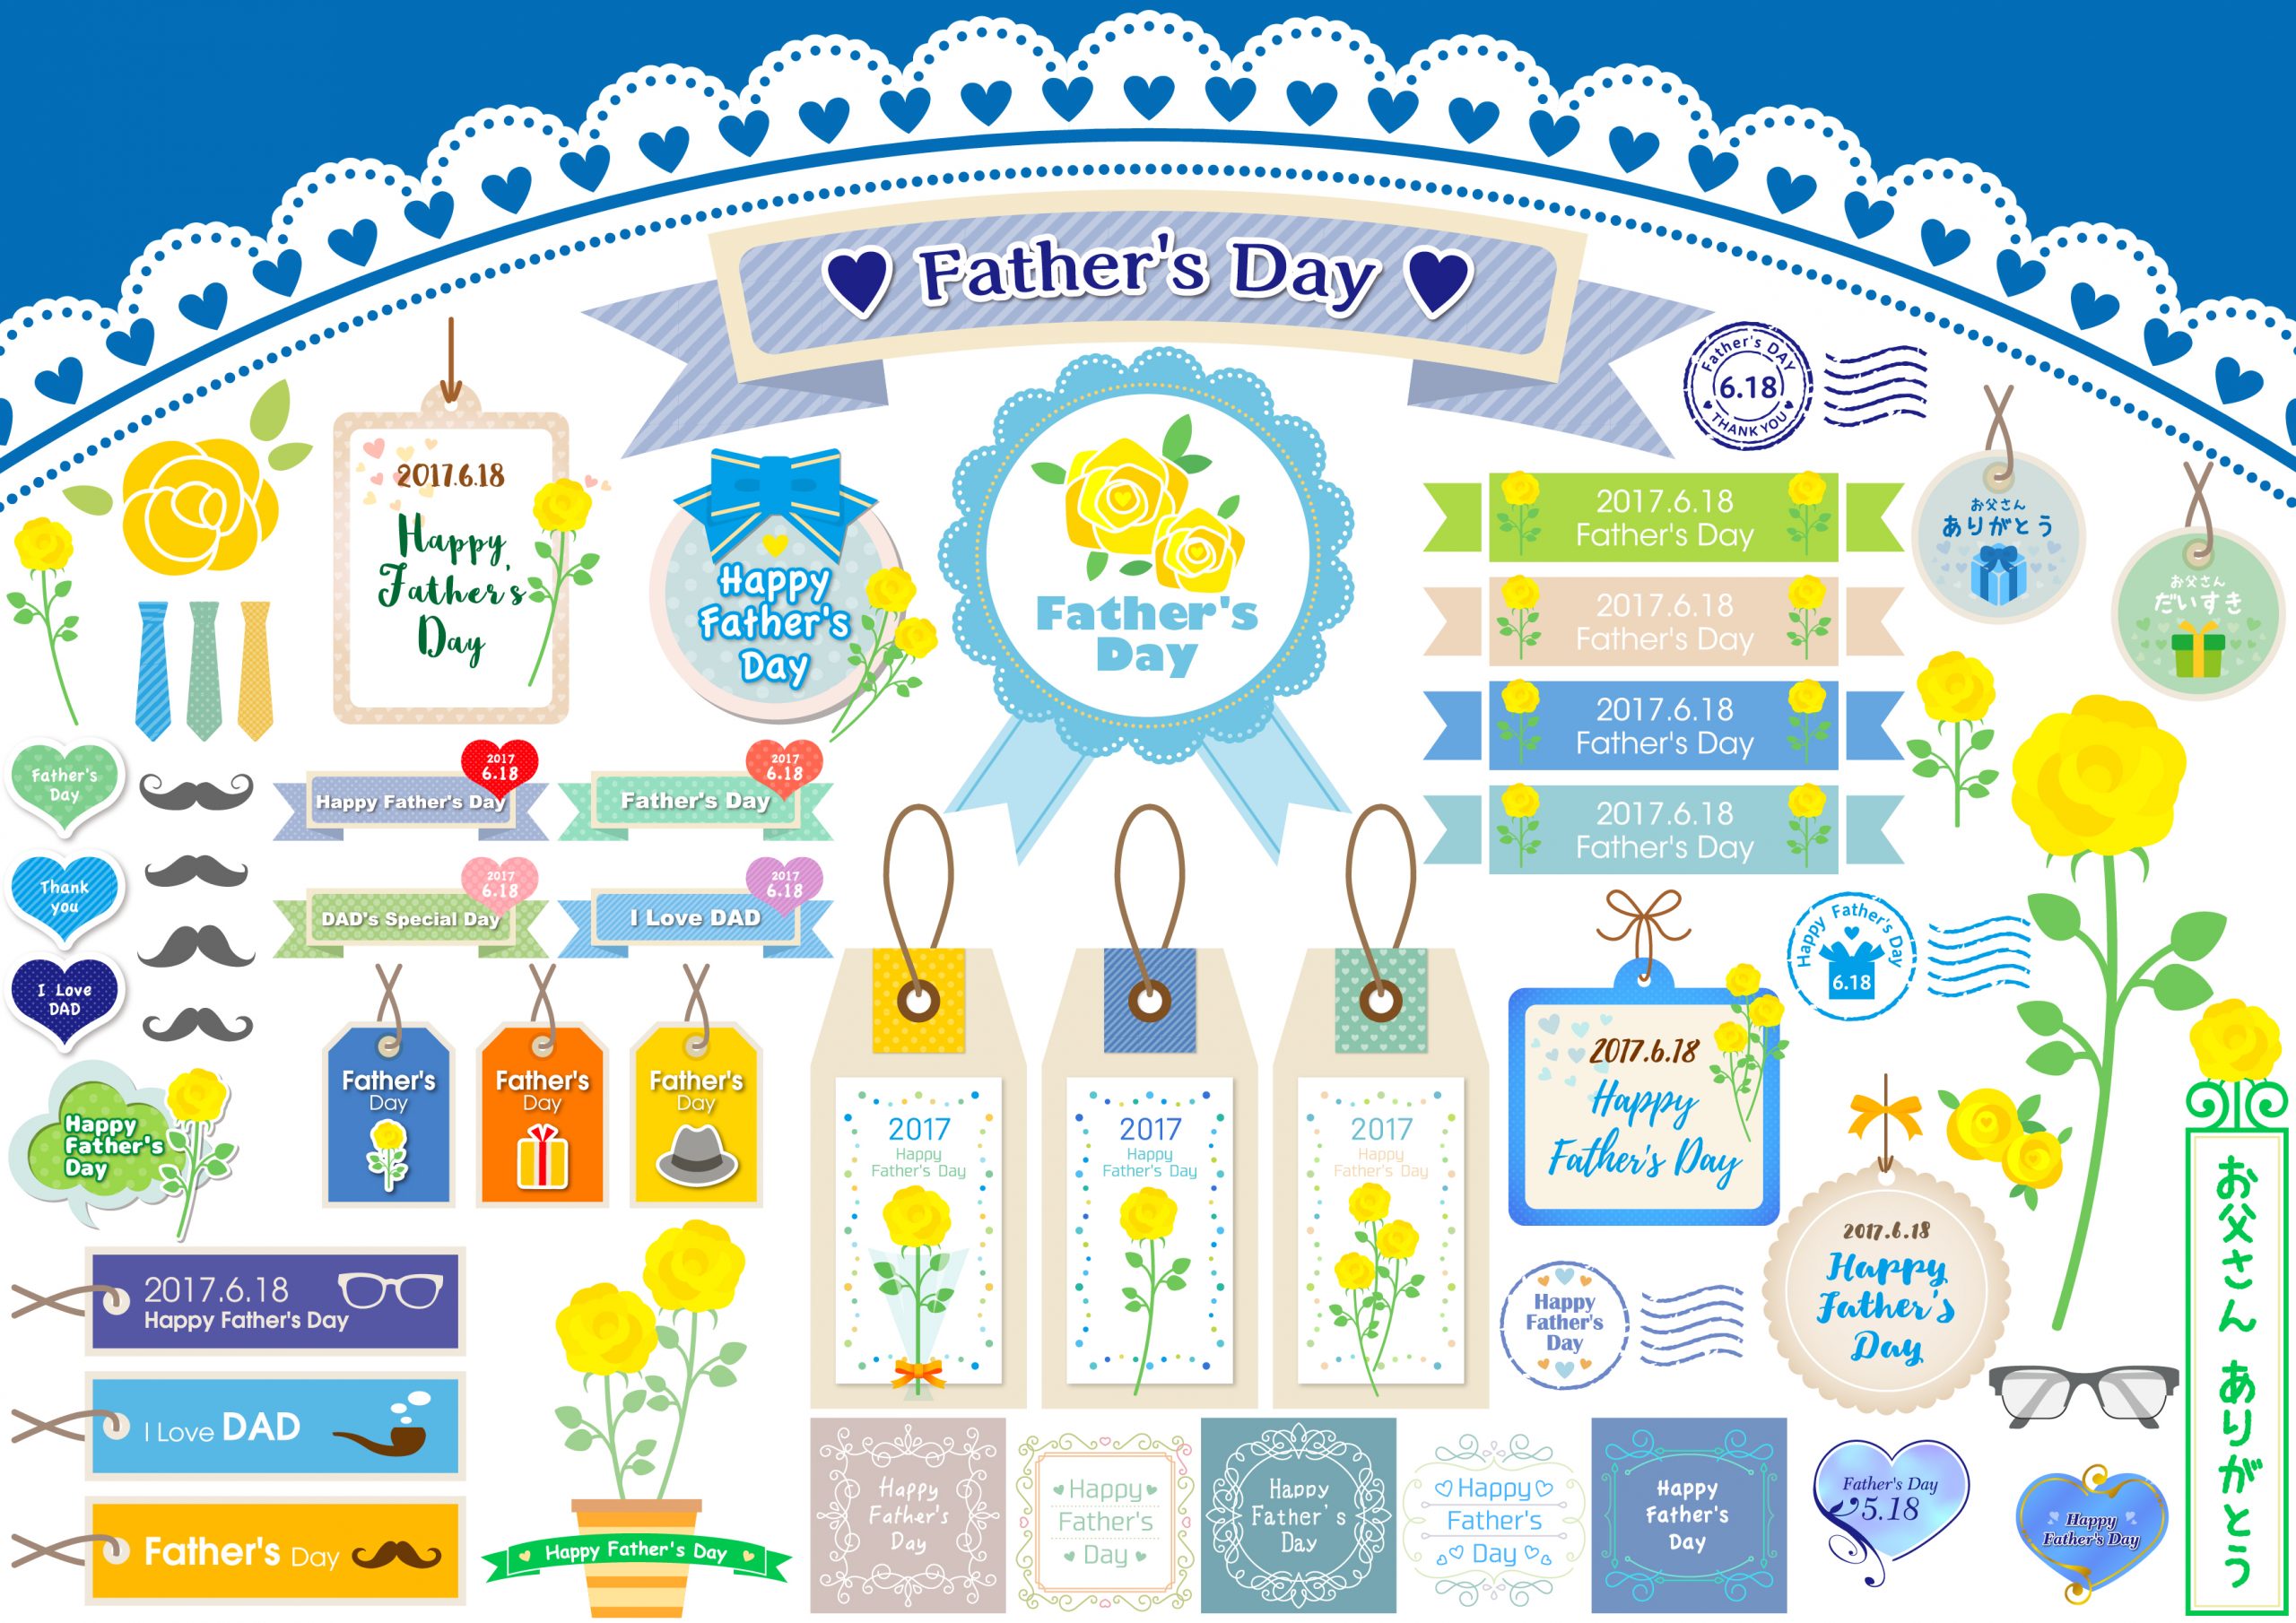 Happy Father's day clipart: 10 illustrations and Vector templates to Download